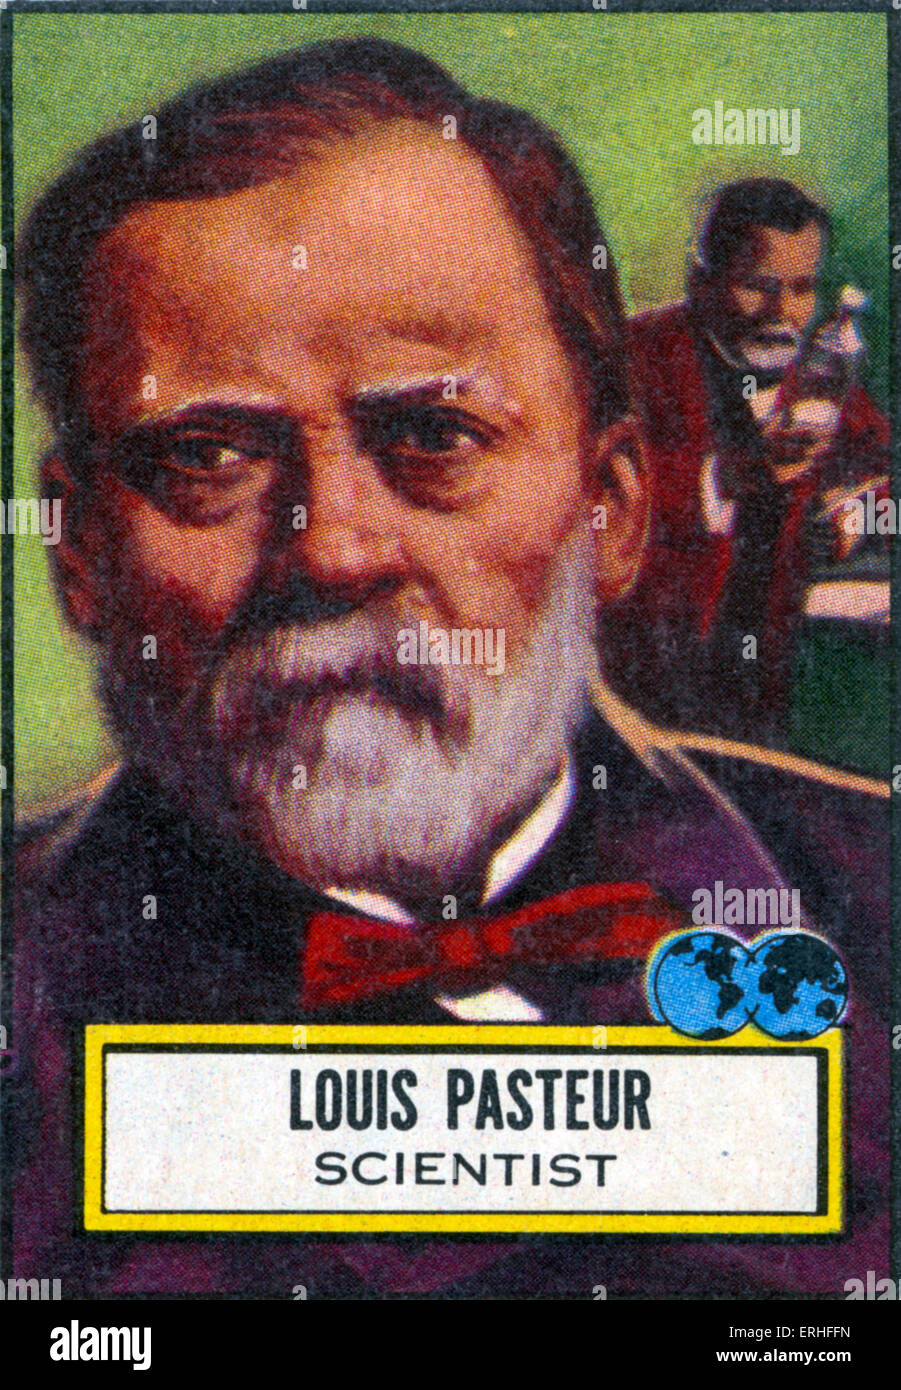 Louis Pasteur - portrait - French chemist, biologist and founder of modern bacteriology - 27 December 1822 - 28 September 1895 Stock Photo